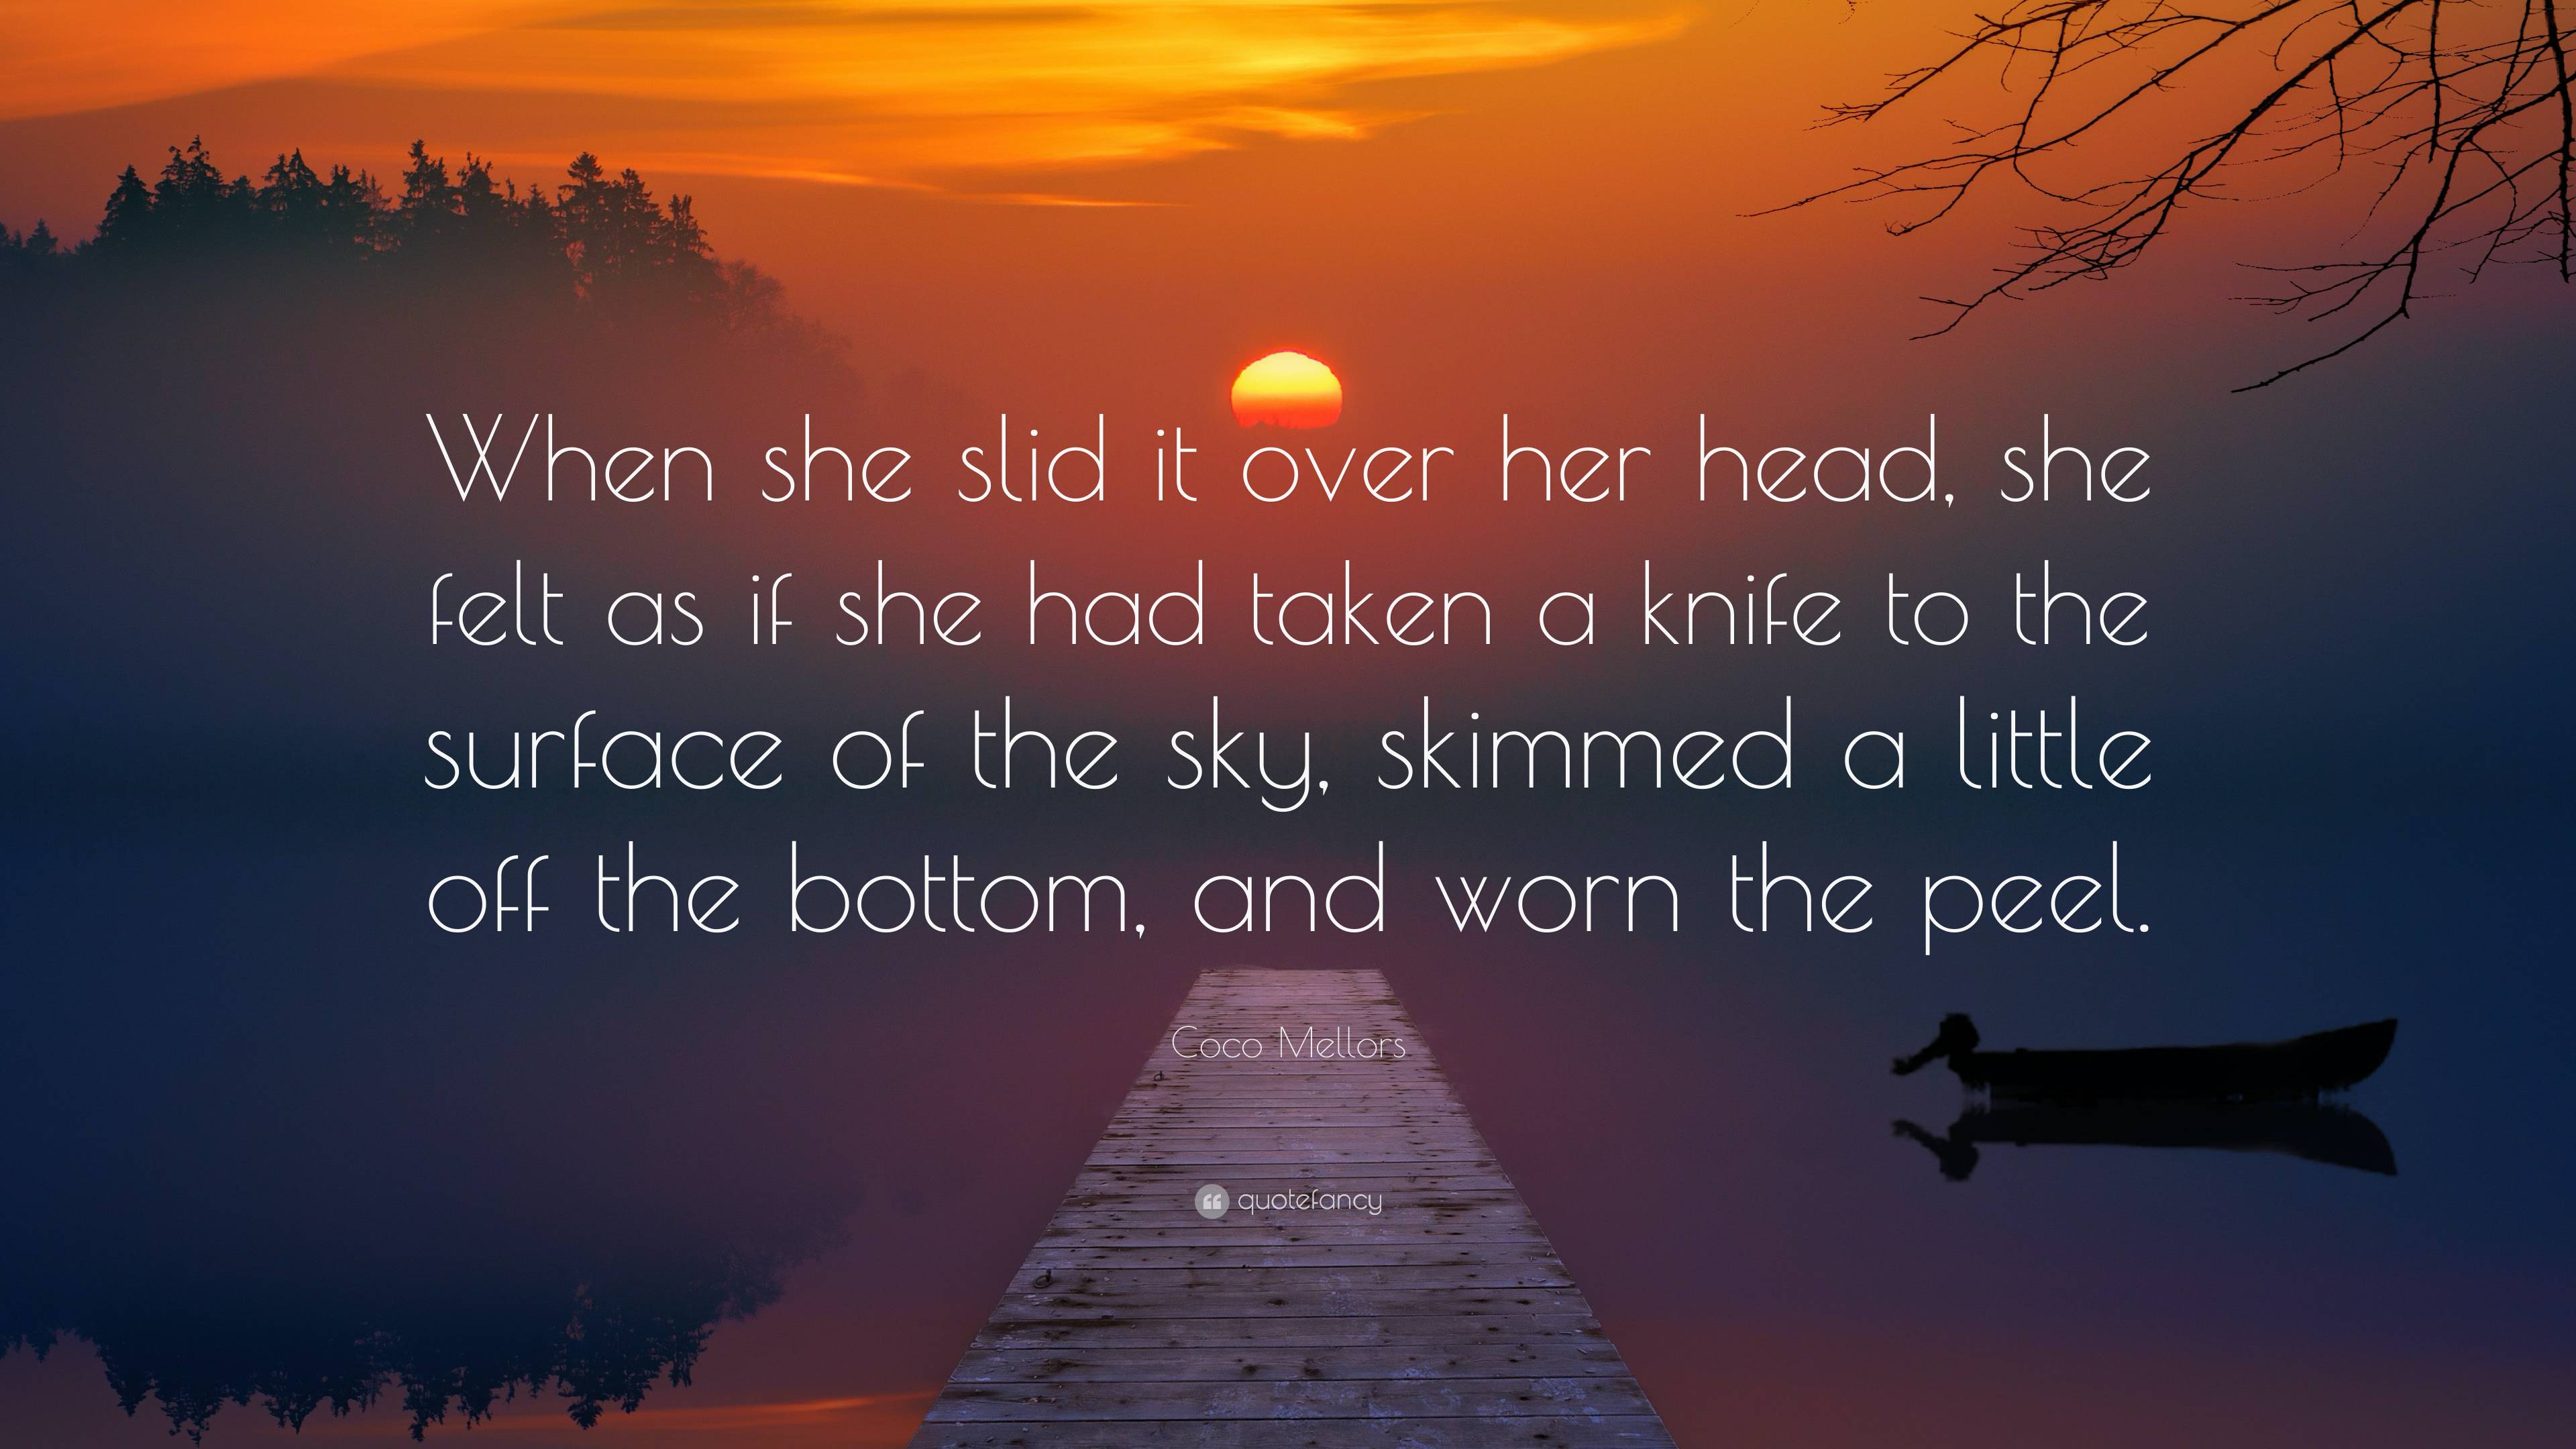 Coco Mellors Quote: “When she slid it over her head, she felt as if she ...